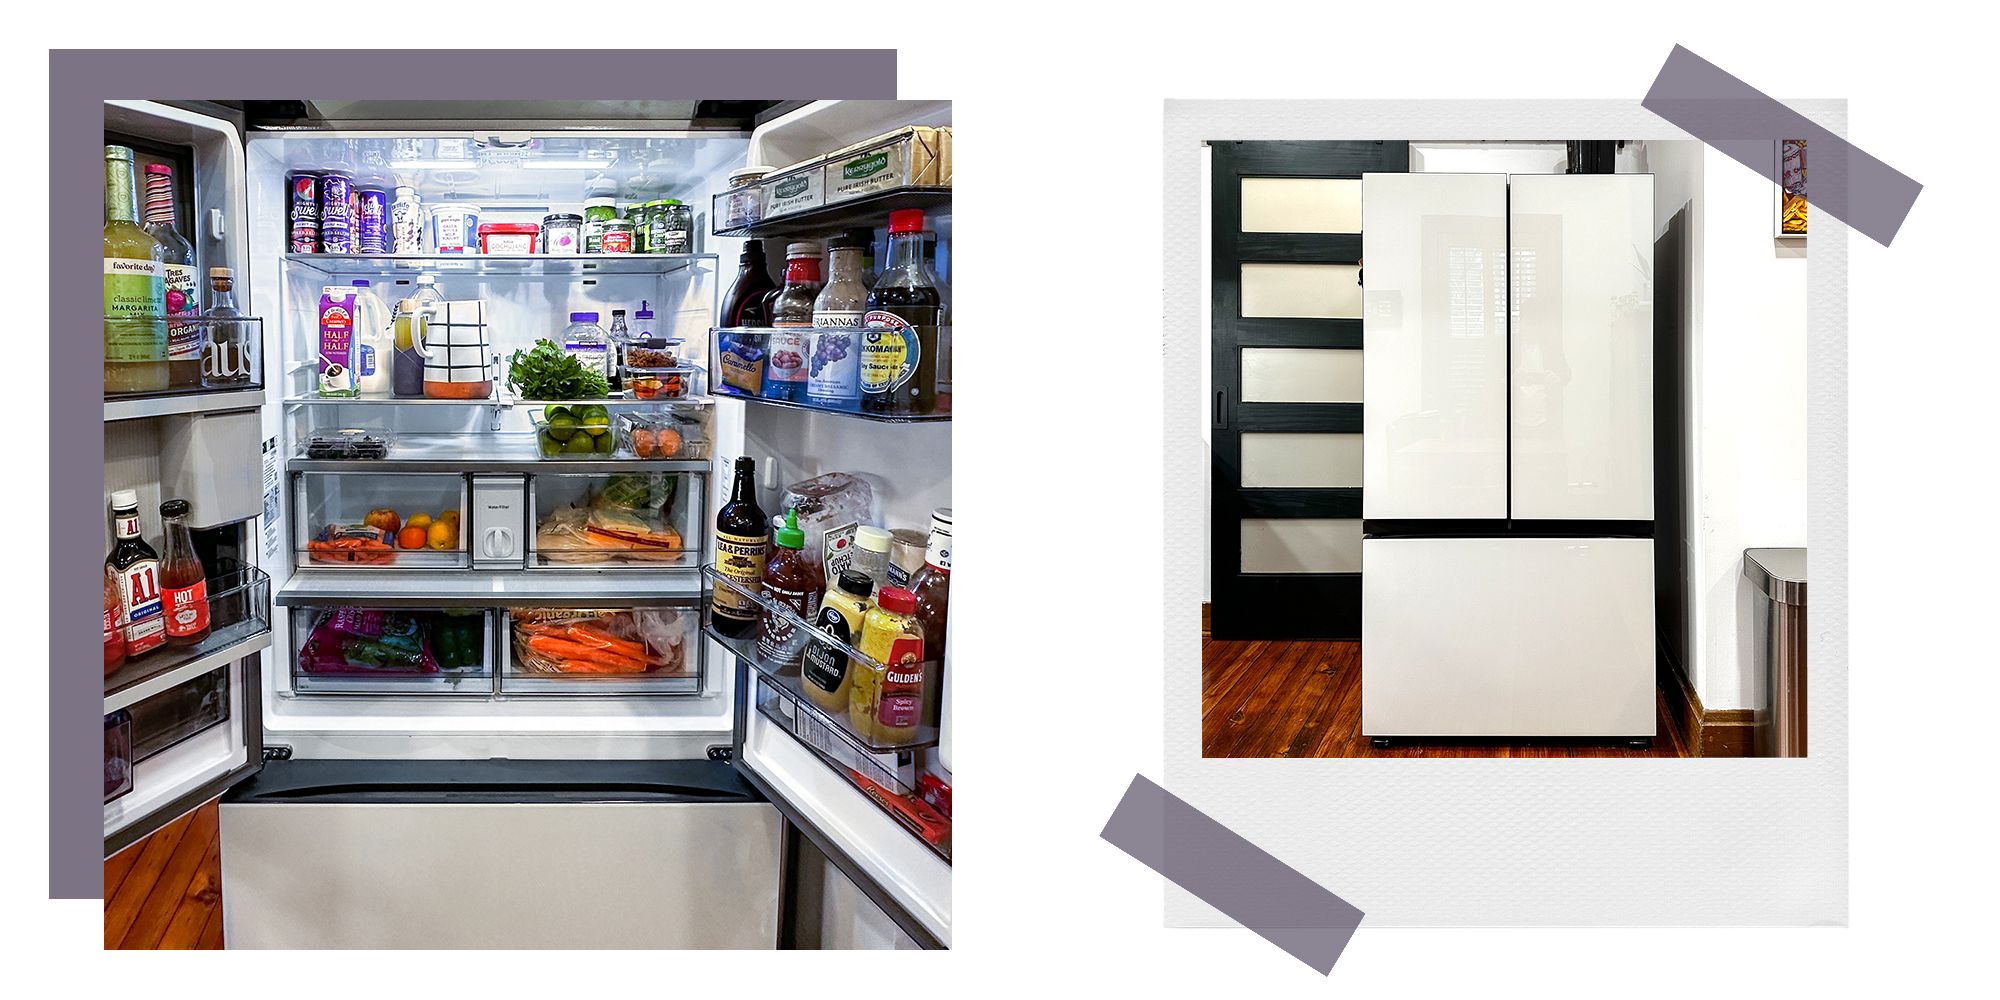 Finding the Right Samsung Refrigerator Parts for Your Model